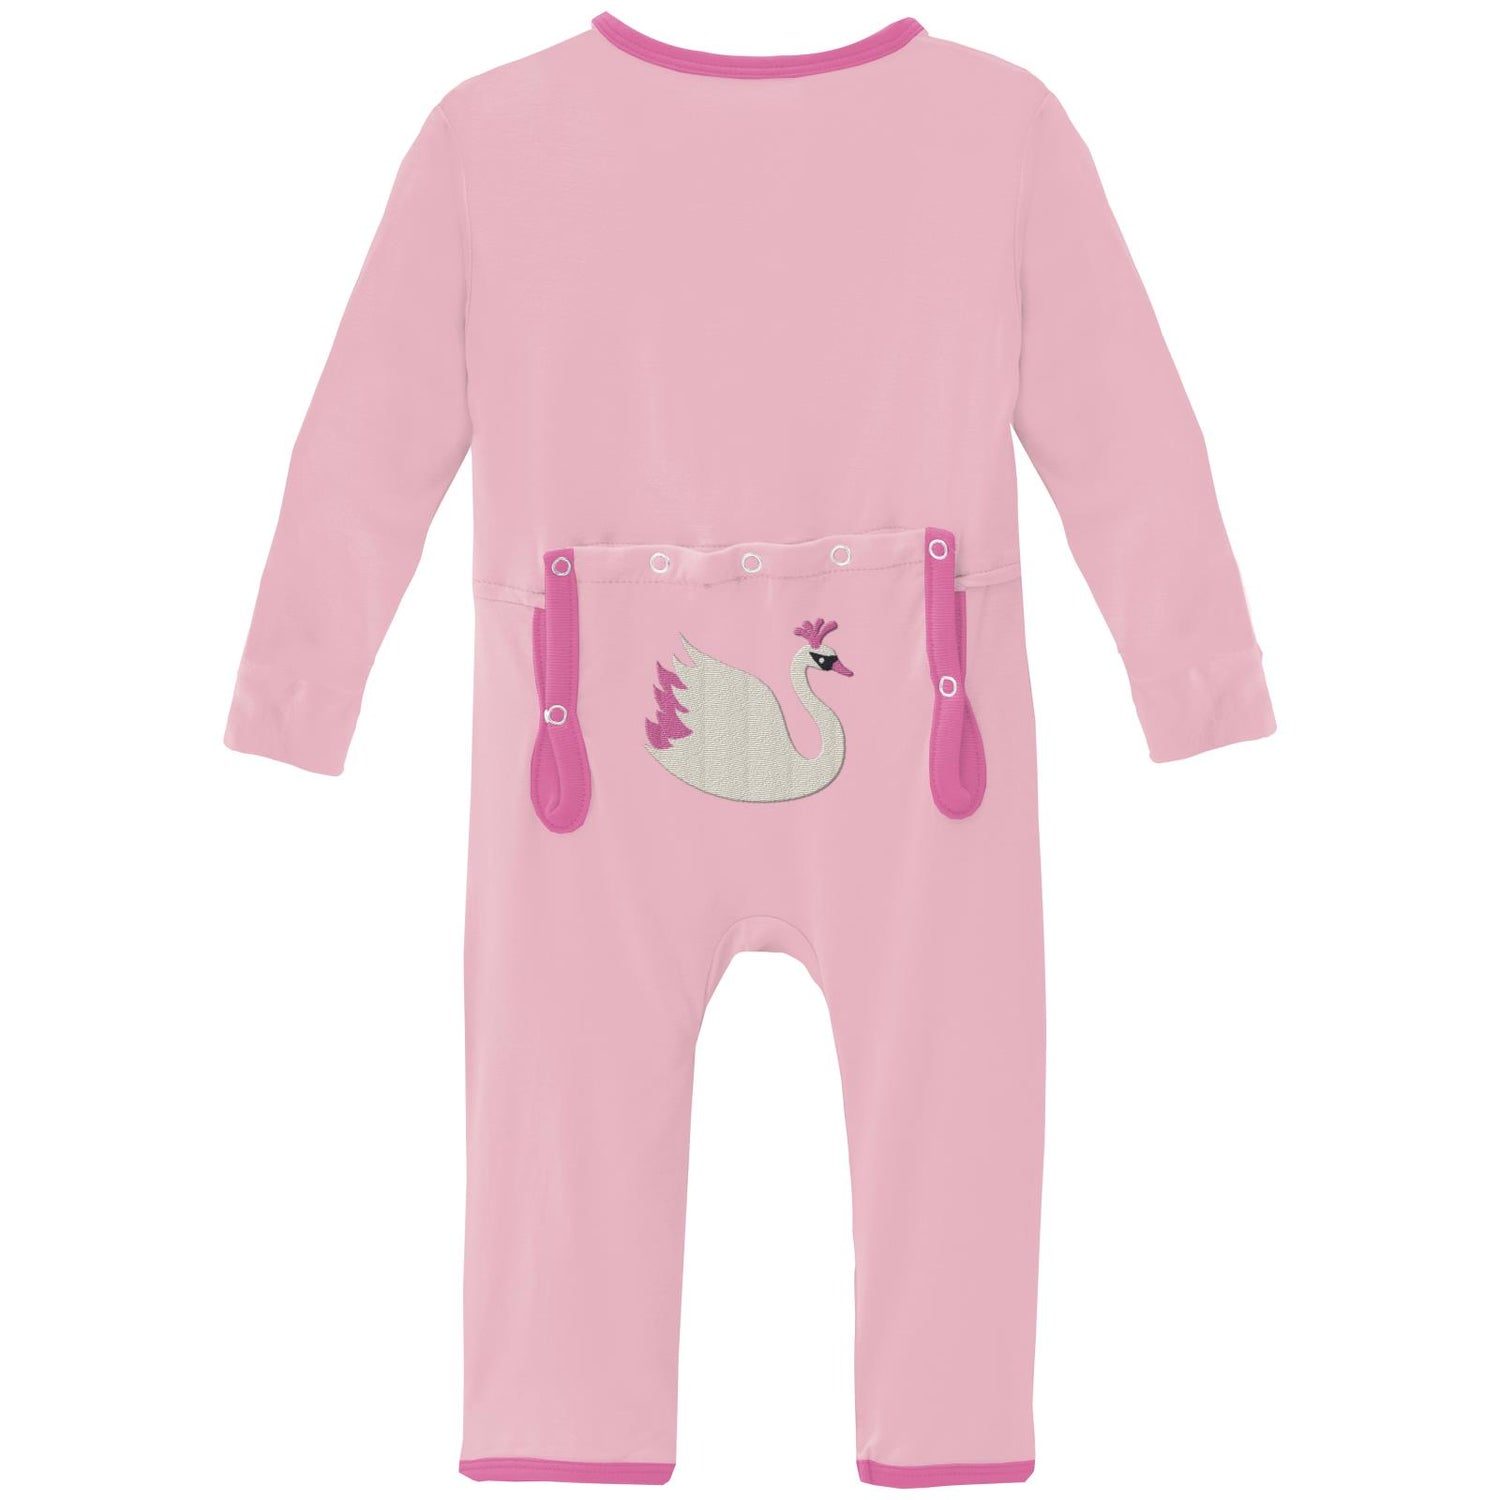 Applique Coverall with 2 Way Zipper in Cake Pop Swan Princess